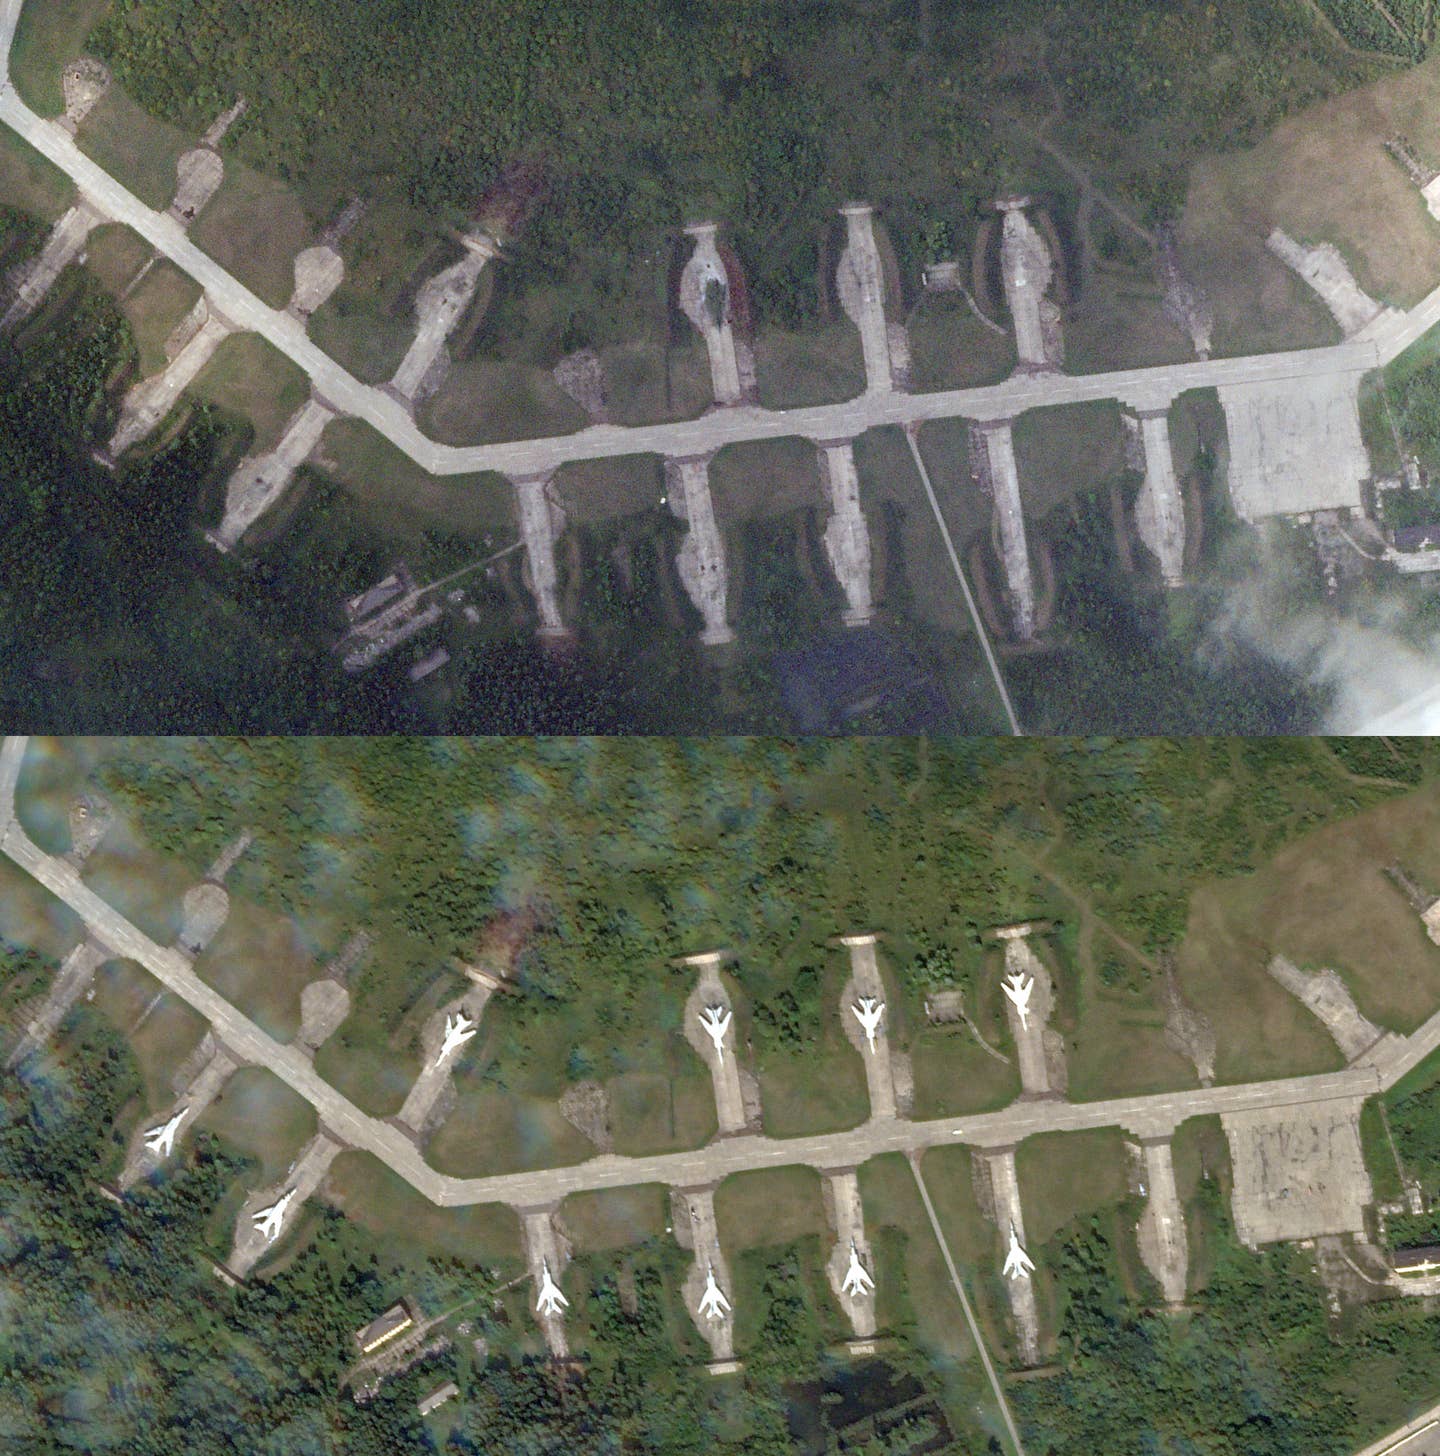 A comparison between a satellite image of the base taken today (top) and the one taken on the 16th of August (bottom). <em>PHOTO © 2023 PLANET LABS INC. ALL RIGHTS RESERVED. REPRINTED BY PERMISSION</em>